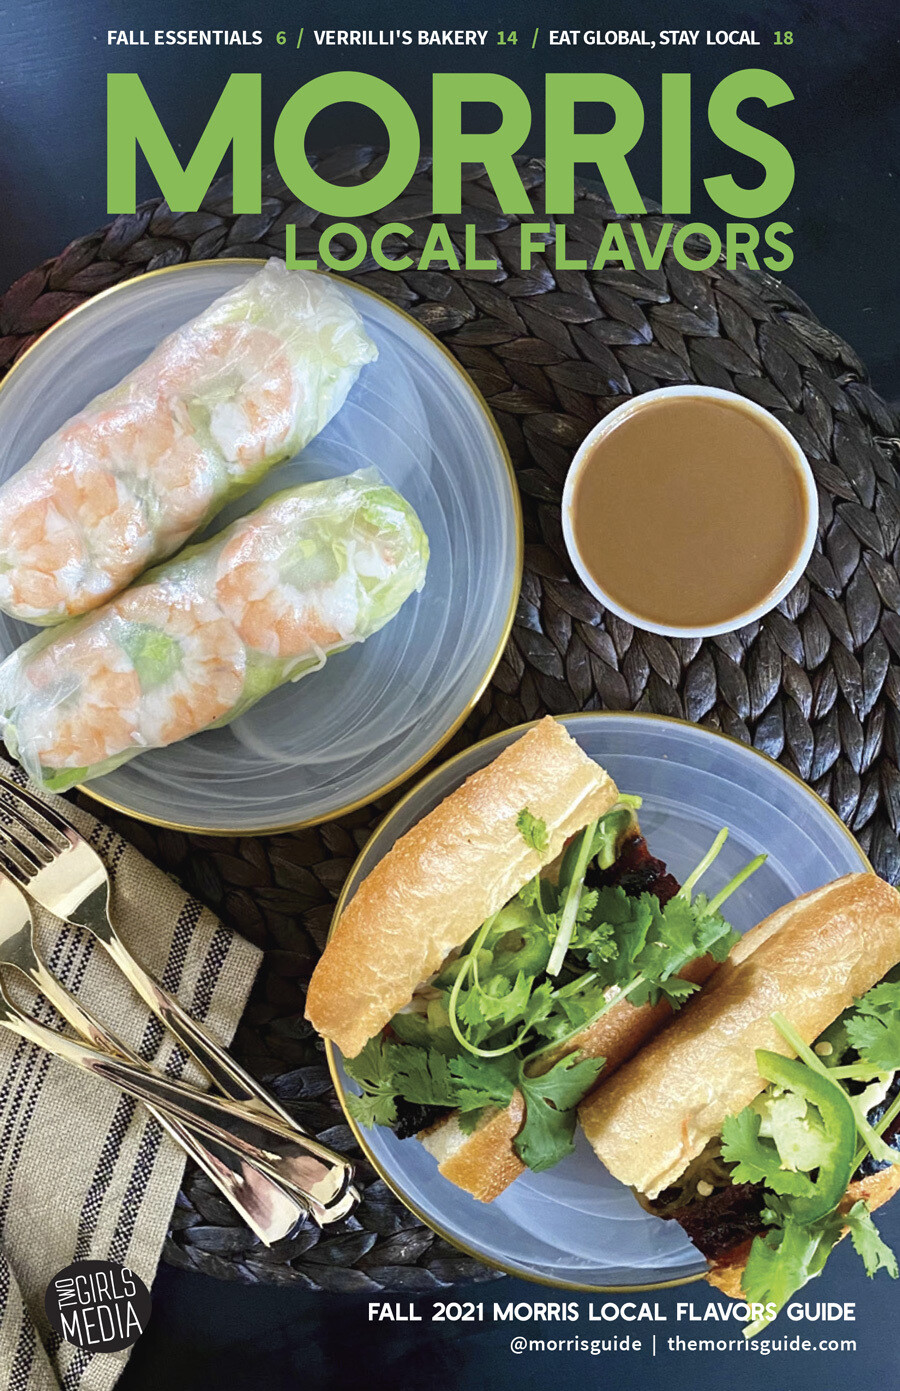 BACK ISSUE: Fall 2021 Morris Local Flavors Guide